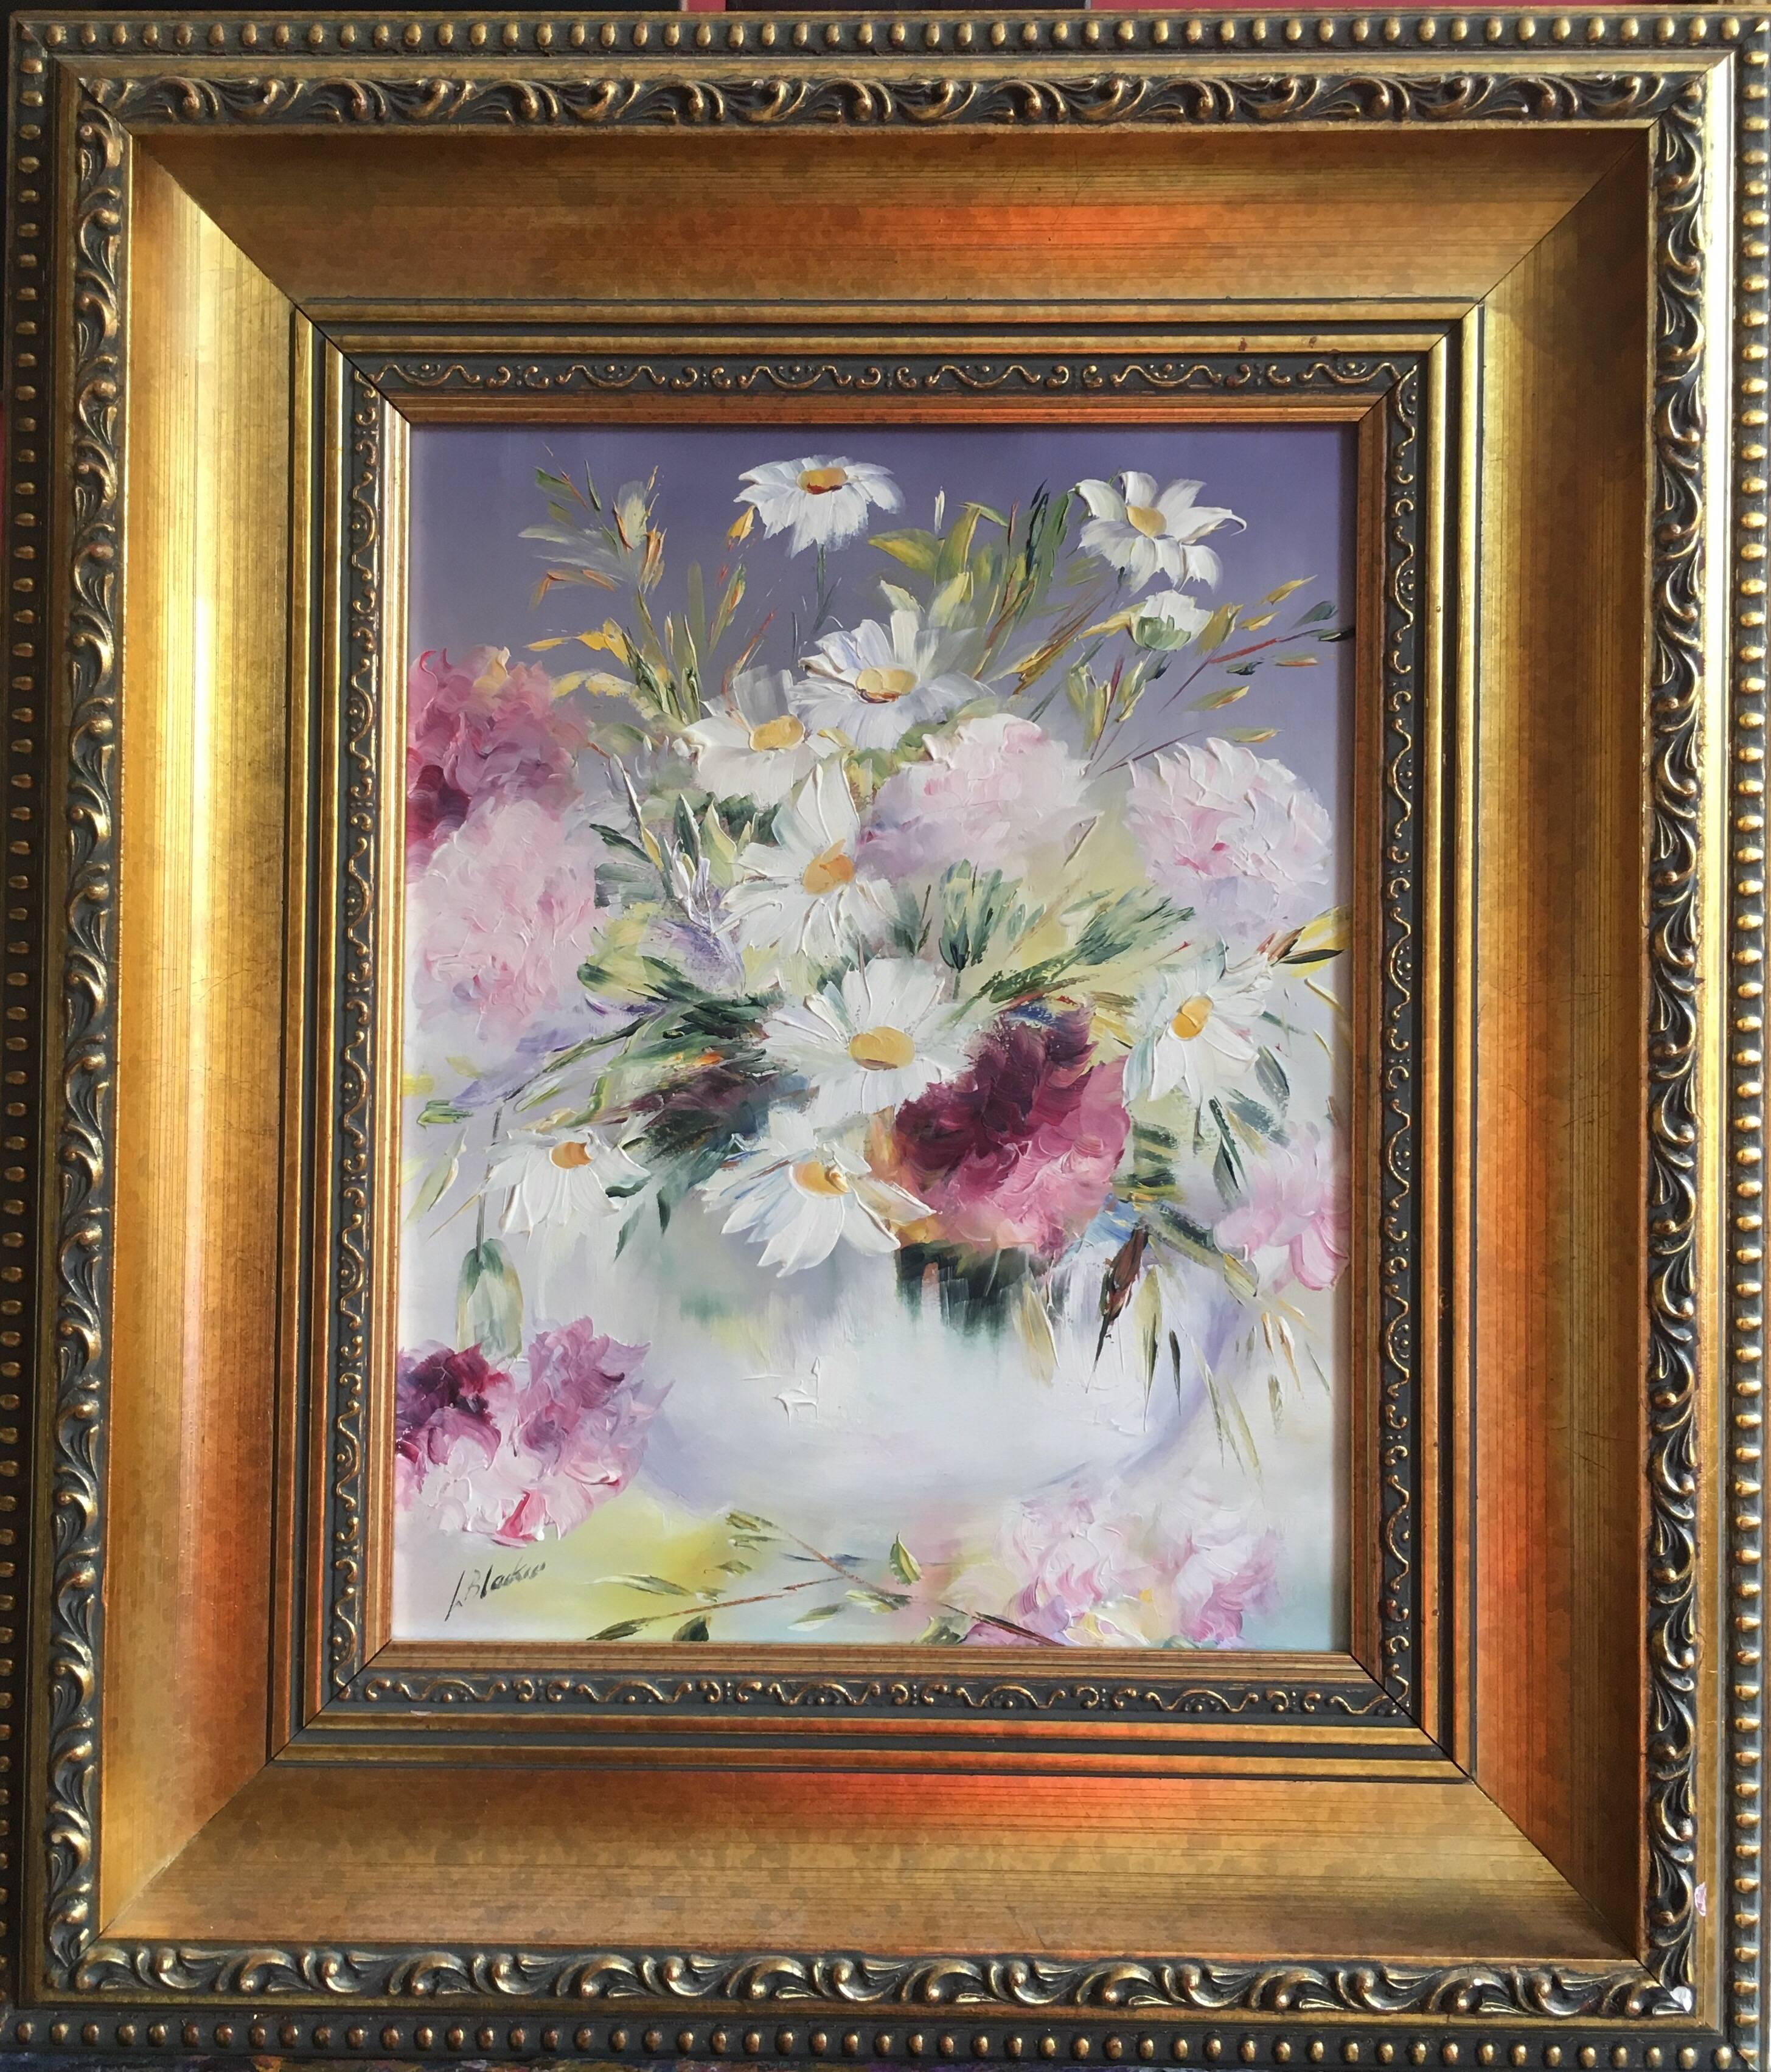 Wild Daisy Floral Arrangement, Oil Painting, Signed - Gray Interior Painting by Lillias Blackie